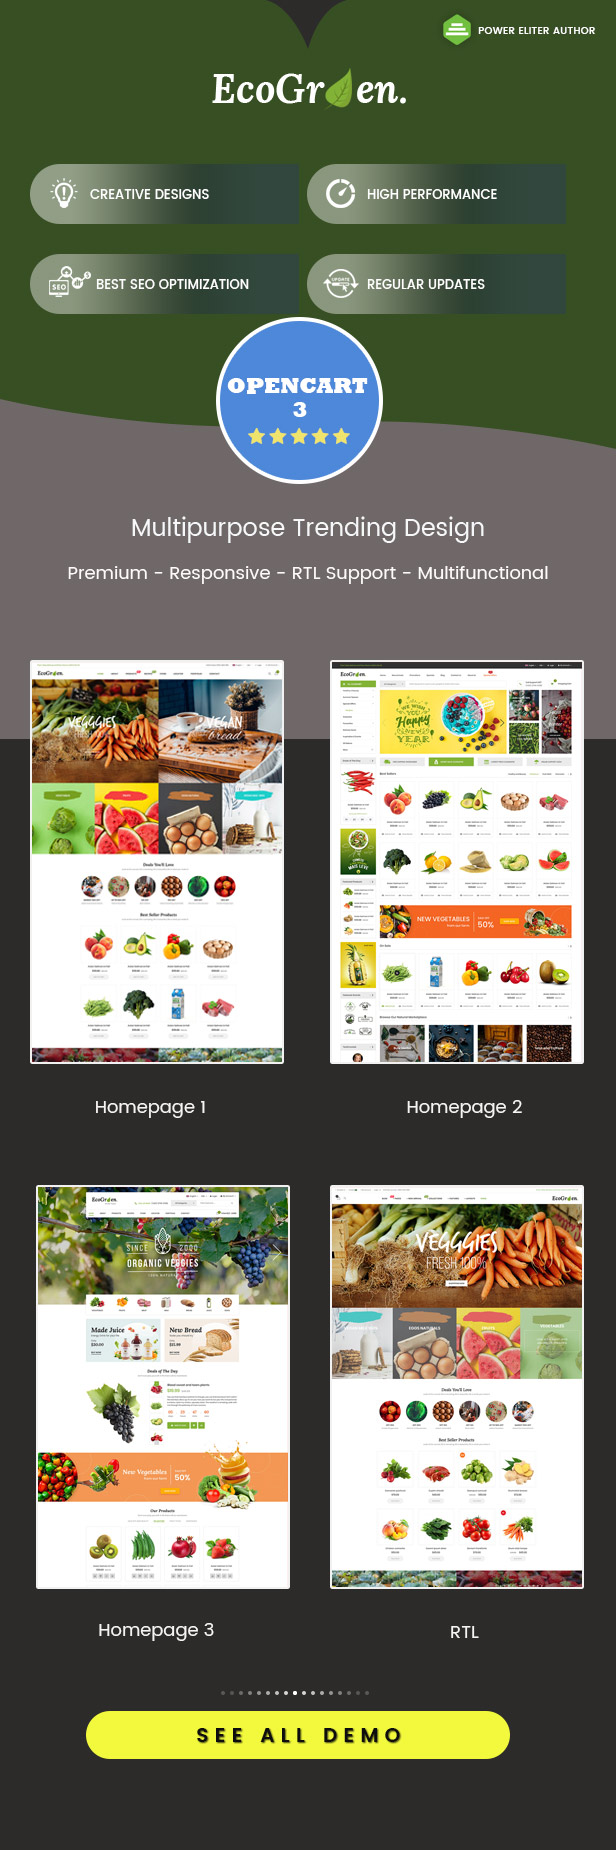 EcoGreen – Multipurpose Responsive OpenCart 3 Theme With Mobile Layouts (Organic Food Topic)